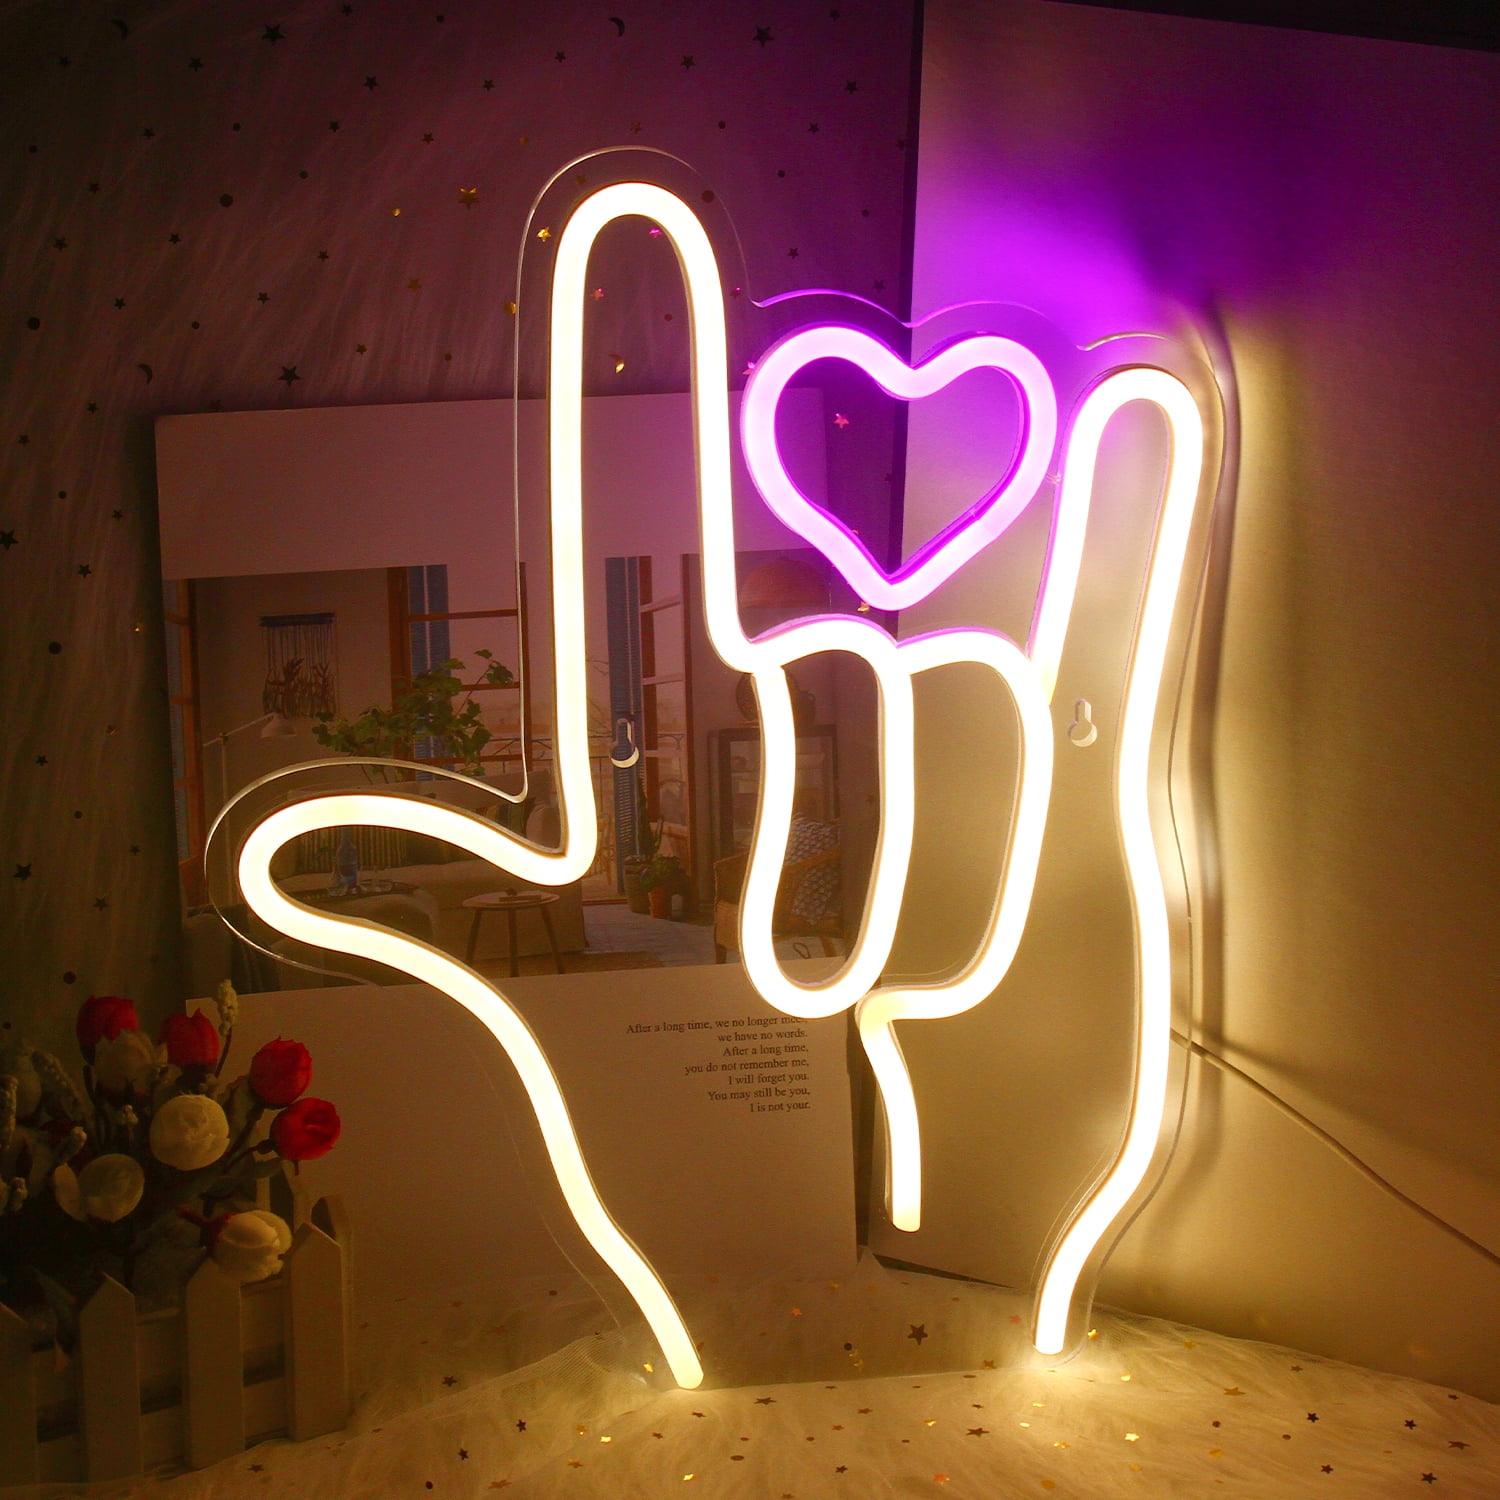 Heart LED Neon Signs Power for Bedroom Home Party Bar Men's Cave Art Wall Decoration - Walmart.com